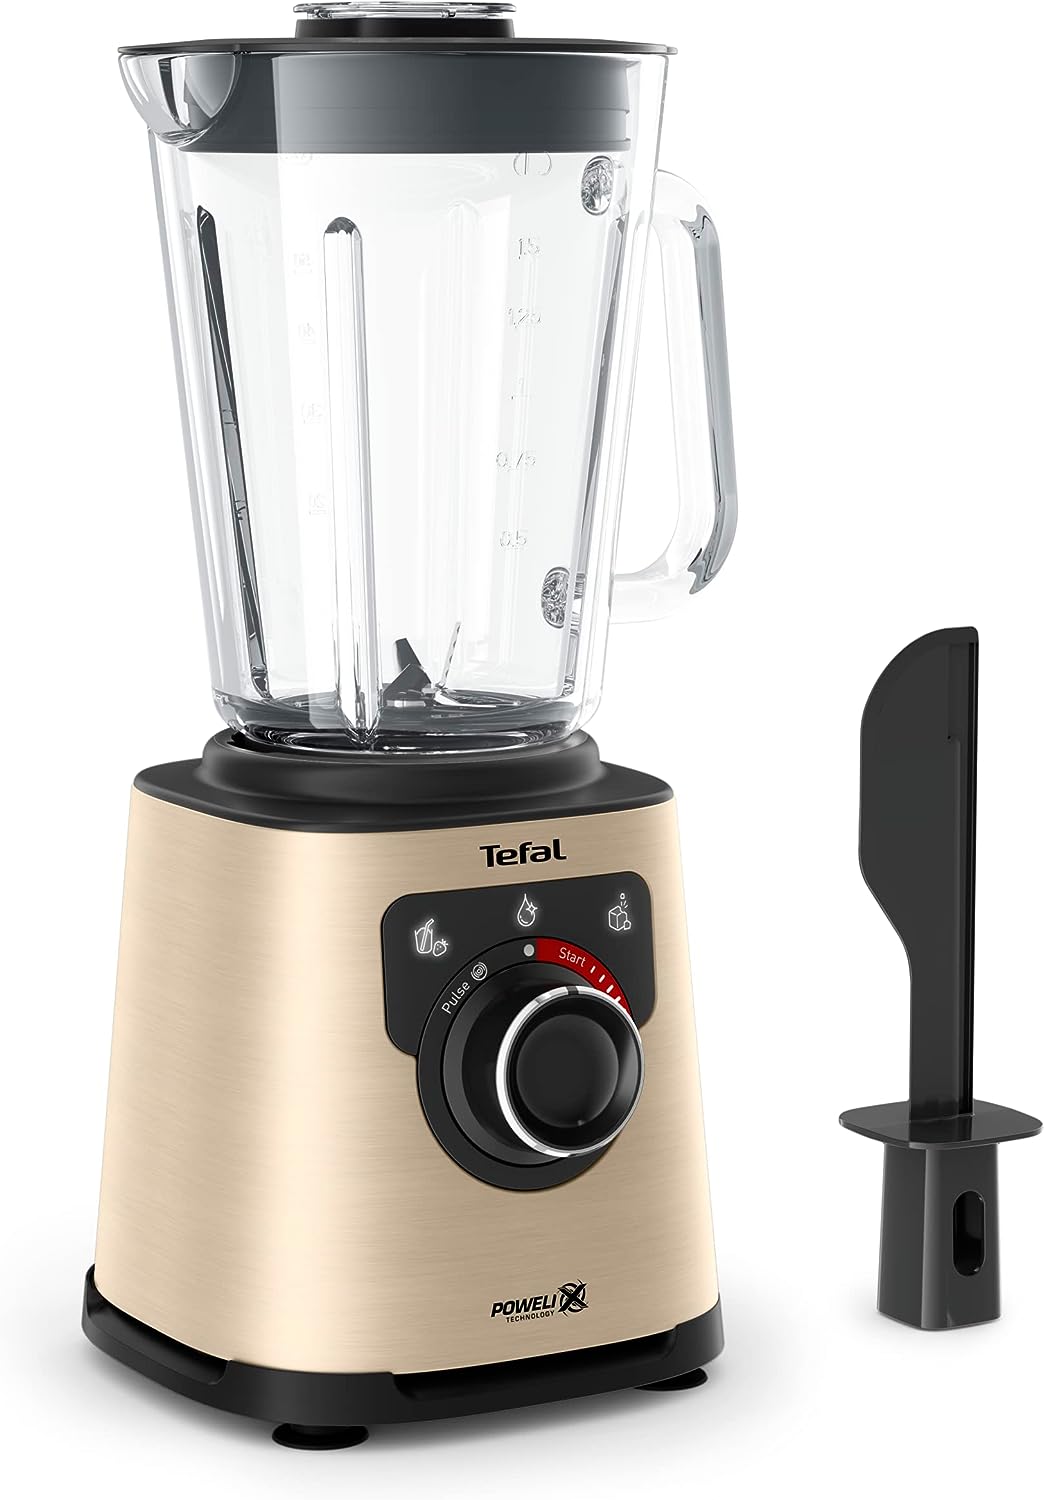 Tefal PerfectMix + High Speed Blender, Powelix Knife Technology for Quick Results, Easy to Clean, Powerful Apertures, 2L Thermo-Resistant Glass Jug, BL871D31